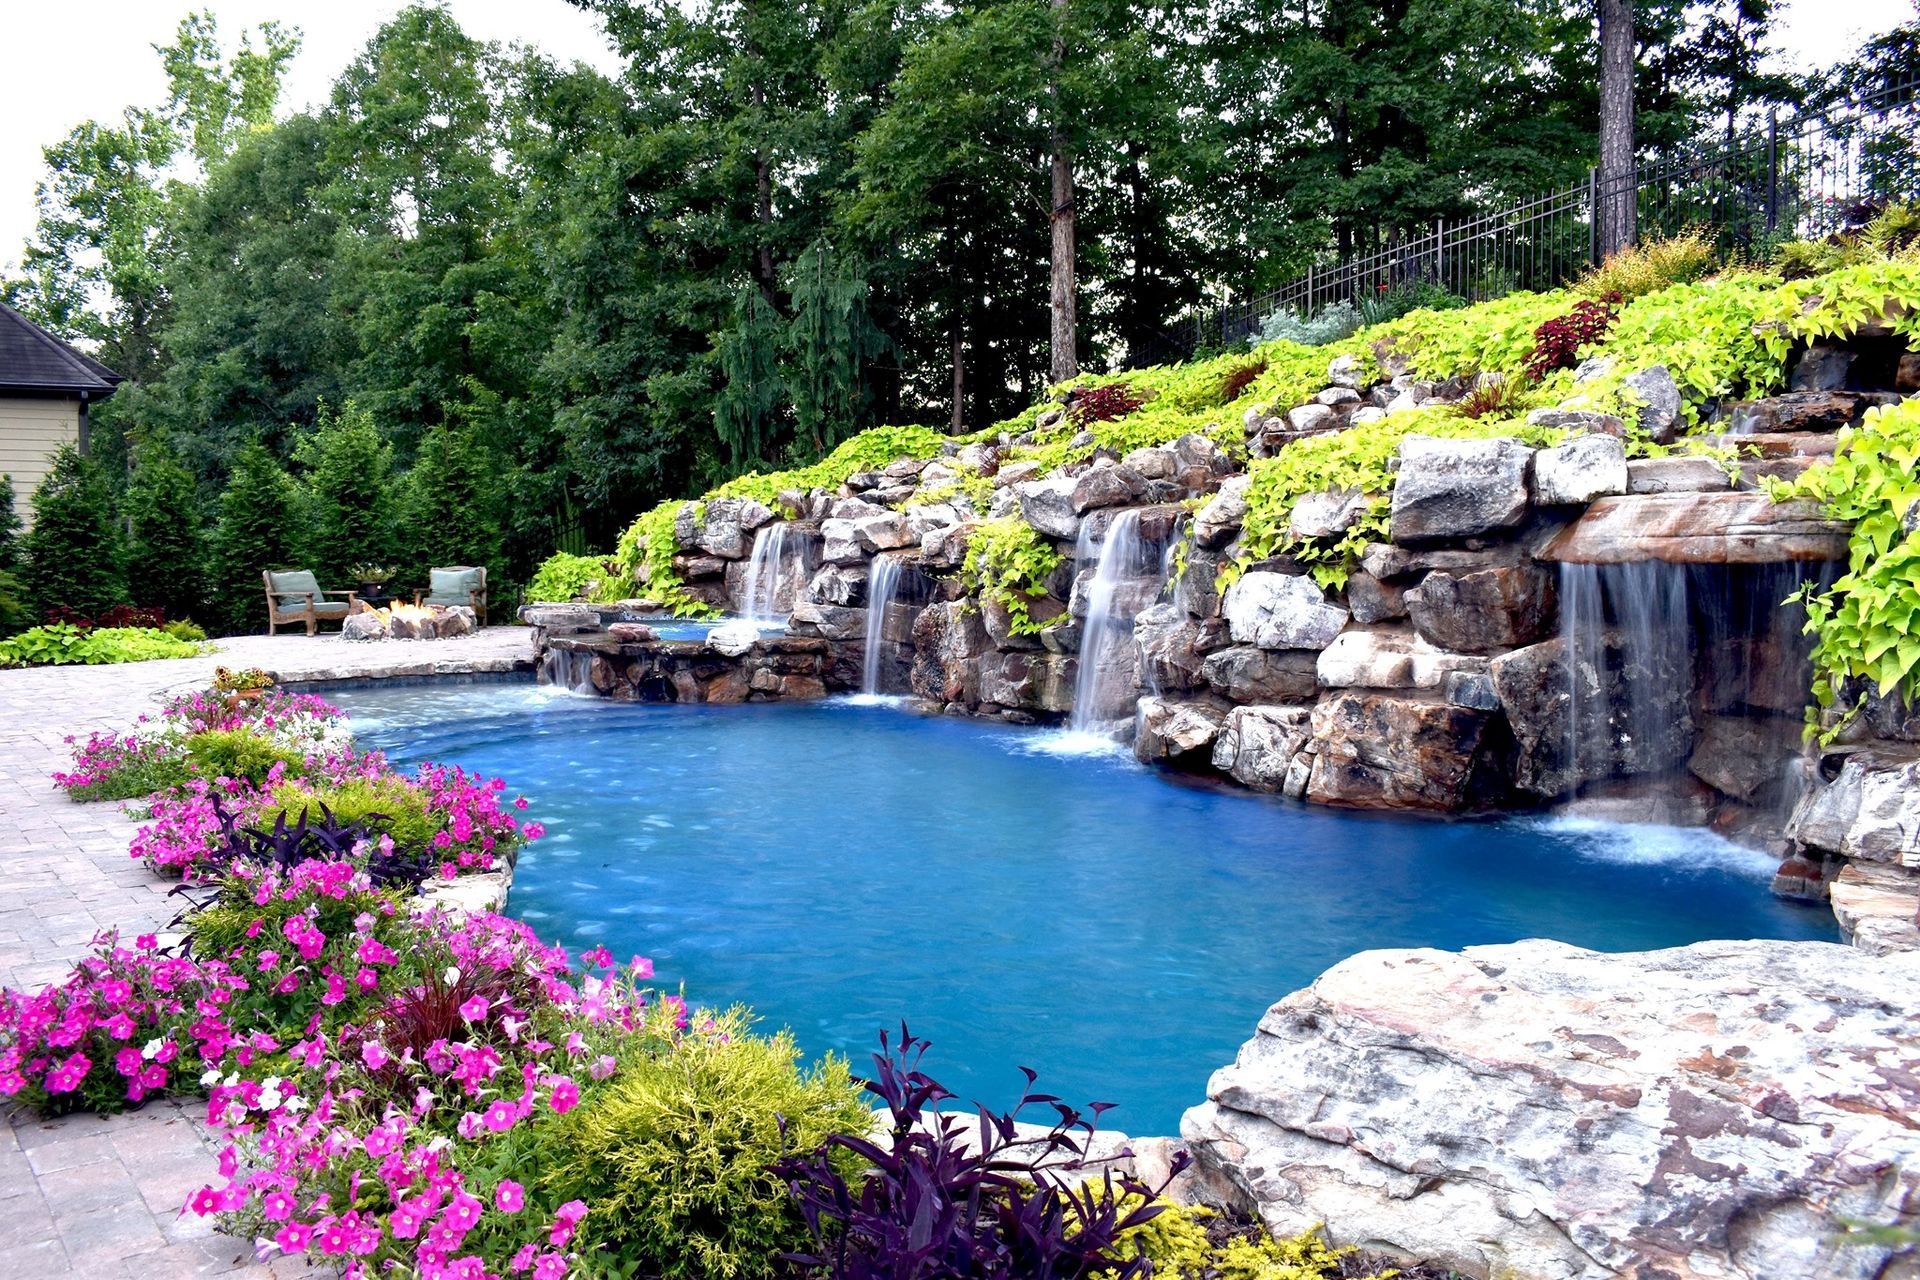 A large swimming pool surrounded by rocks and flowers with a waterfall in the background.